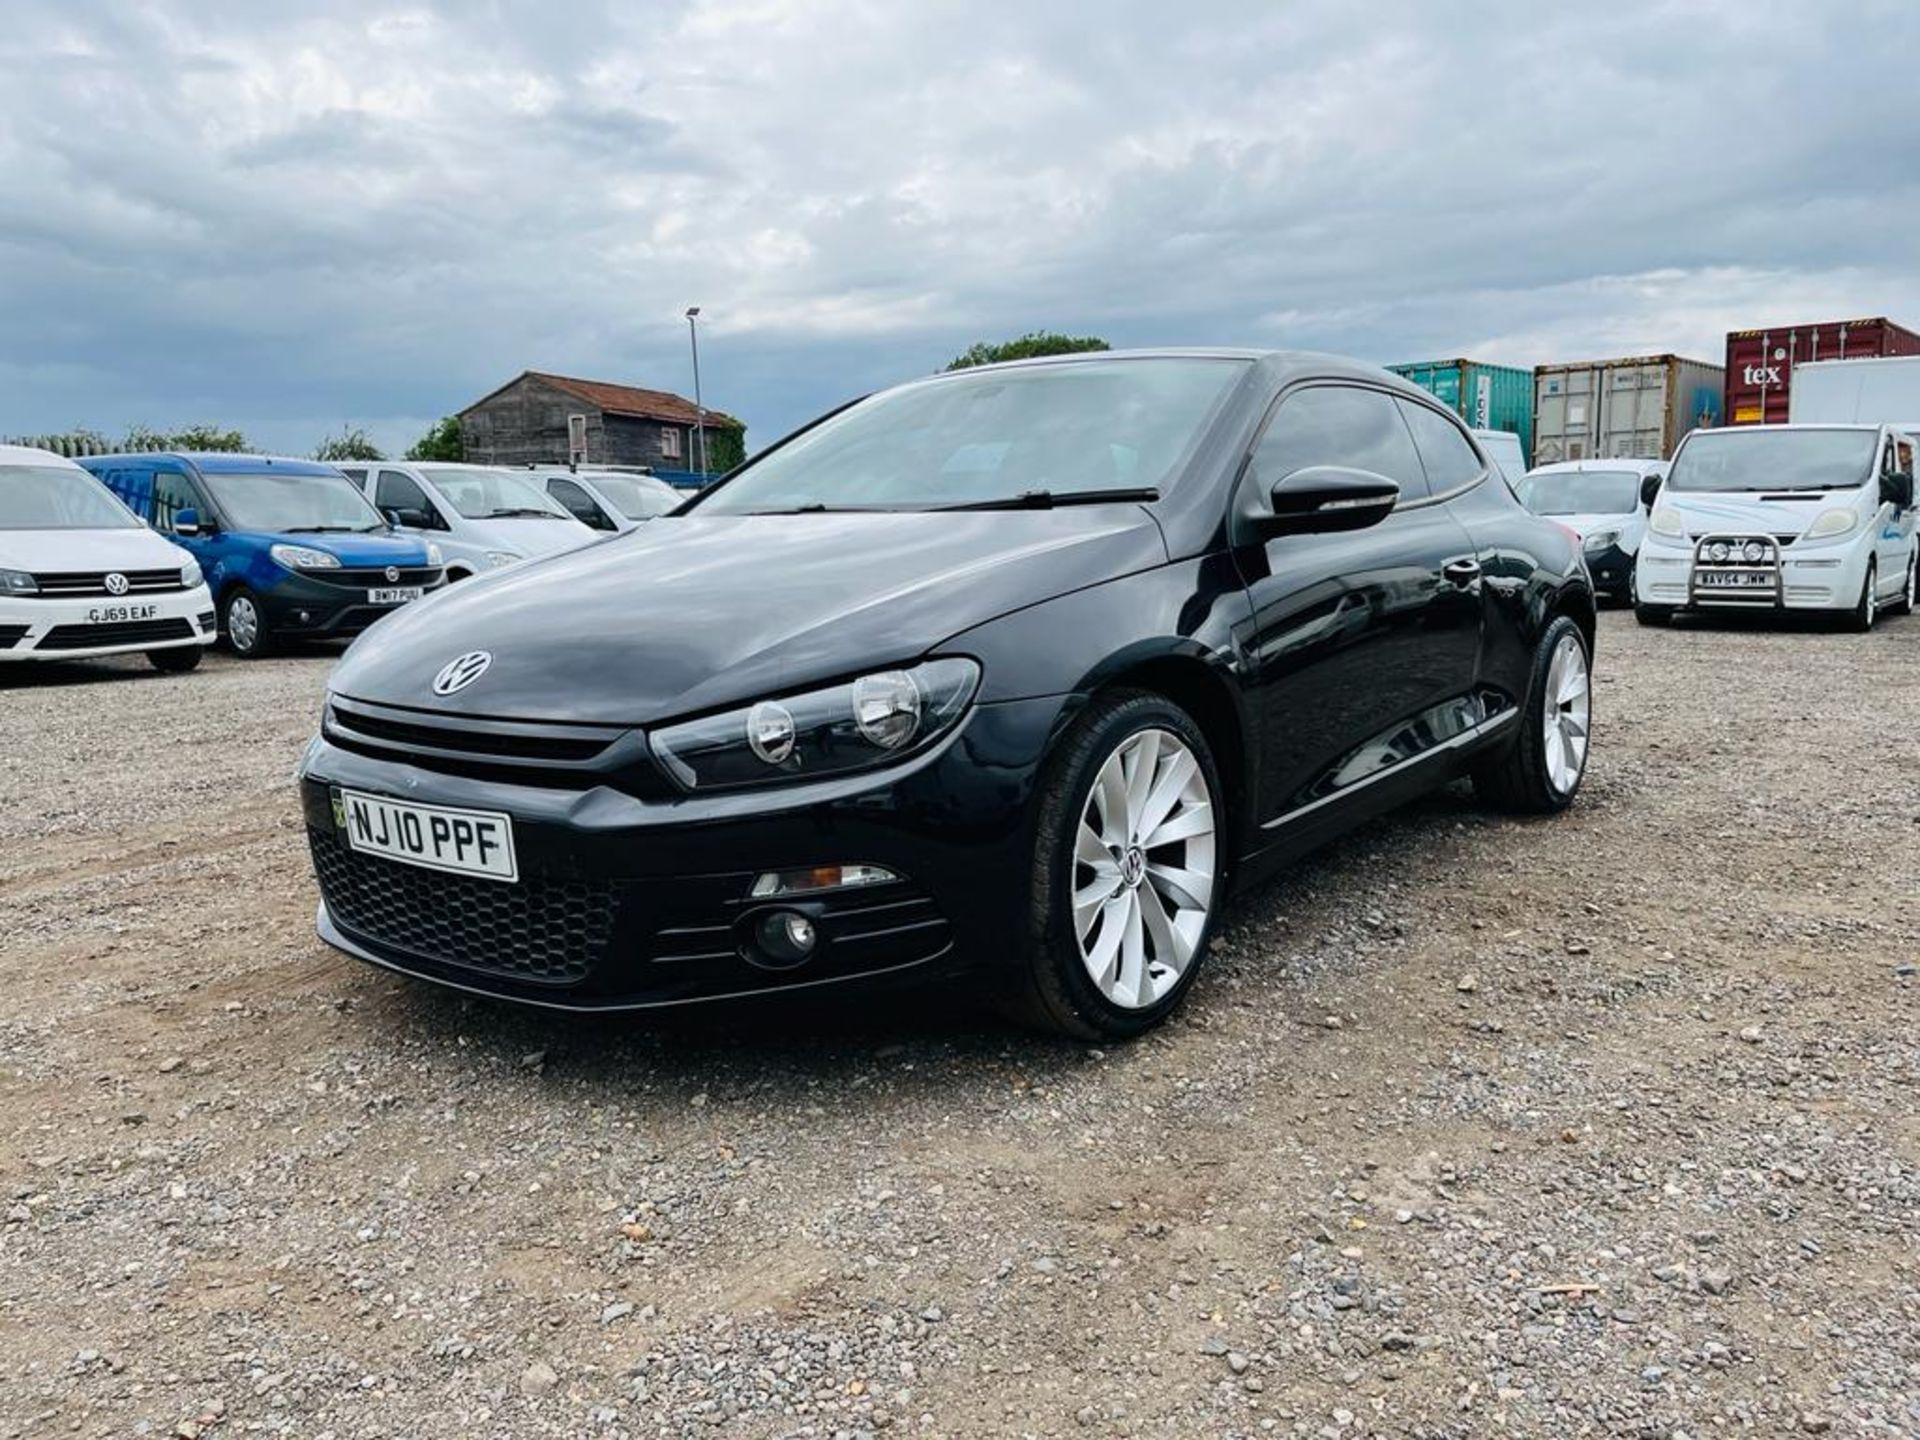 ** ON SALE ** Volkswagen Scirocco GT 2.0 TSI 210 Coupe 2010 '10 Reg' Sat Nav - A/C - Only 78719 - Image 3 of 25